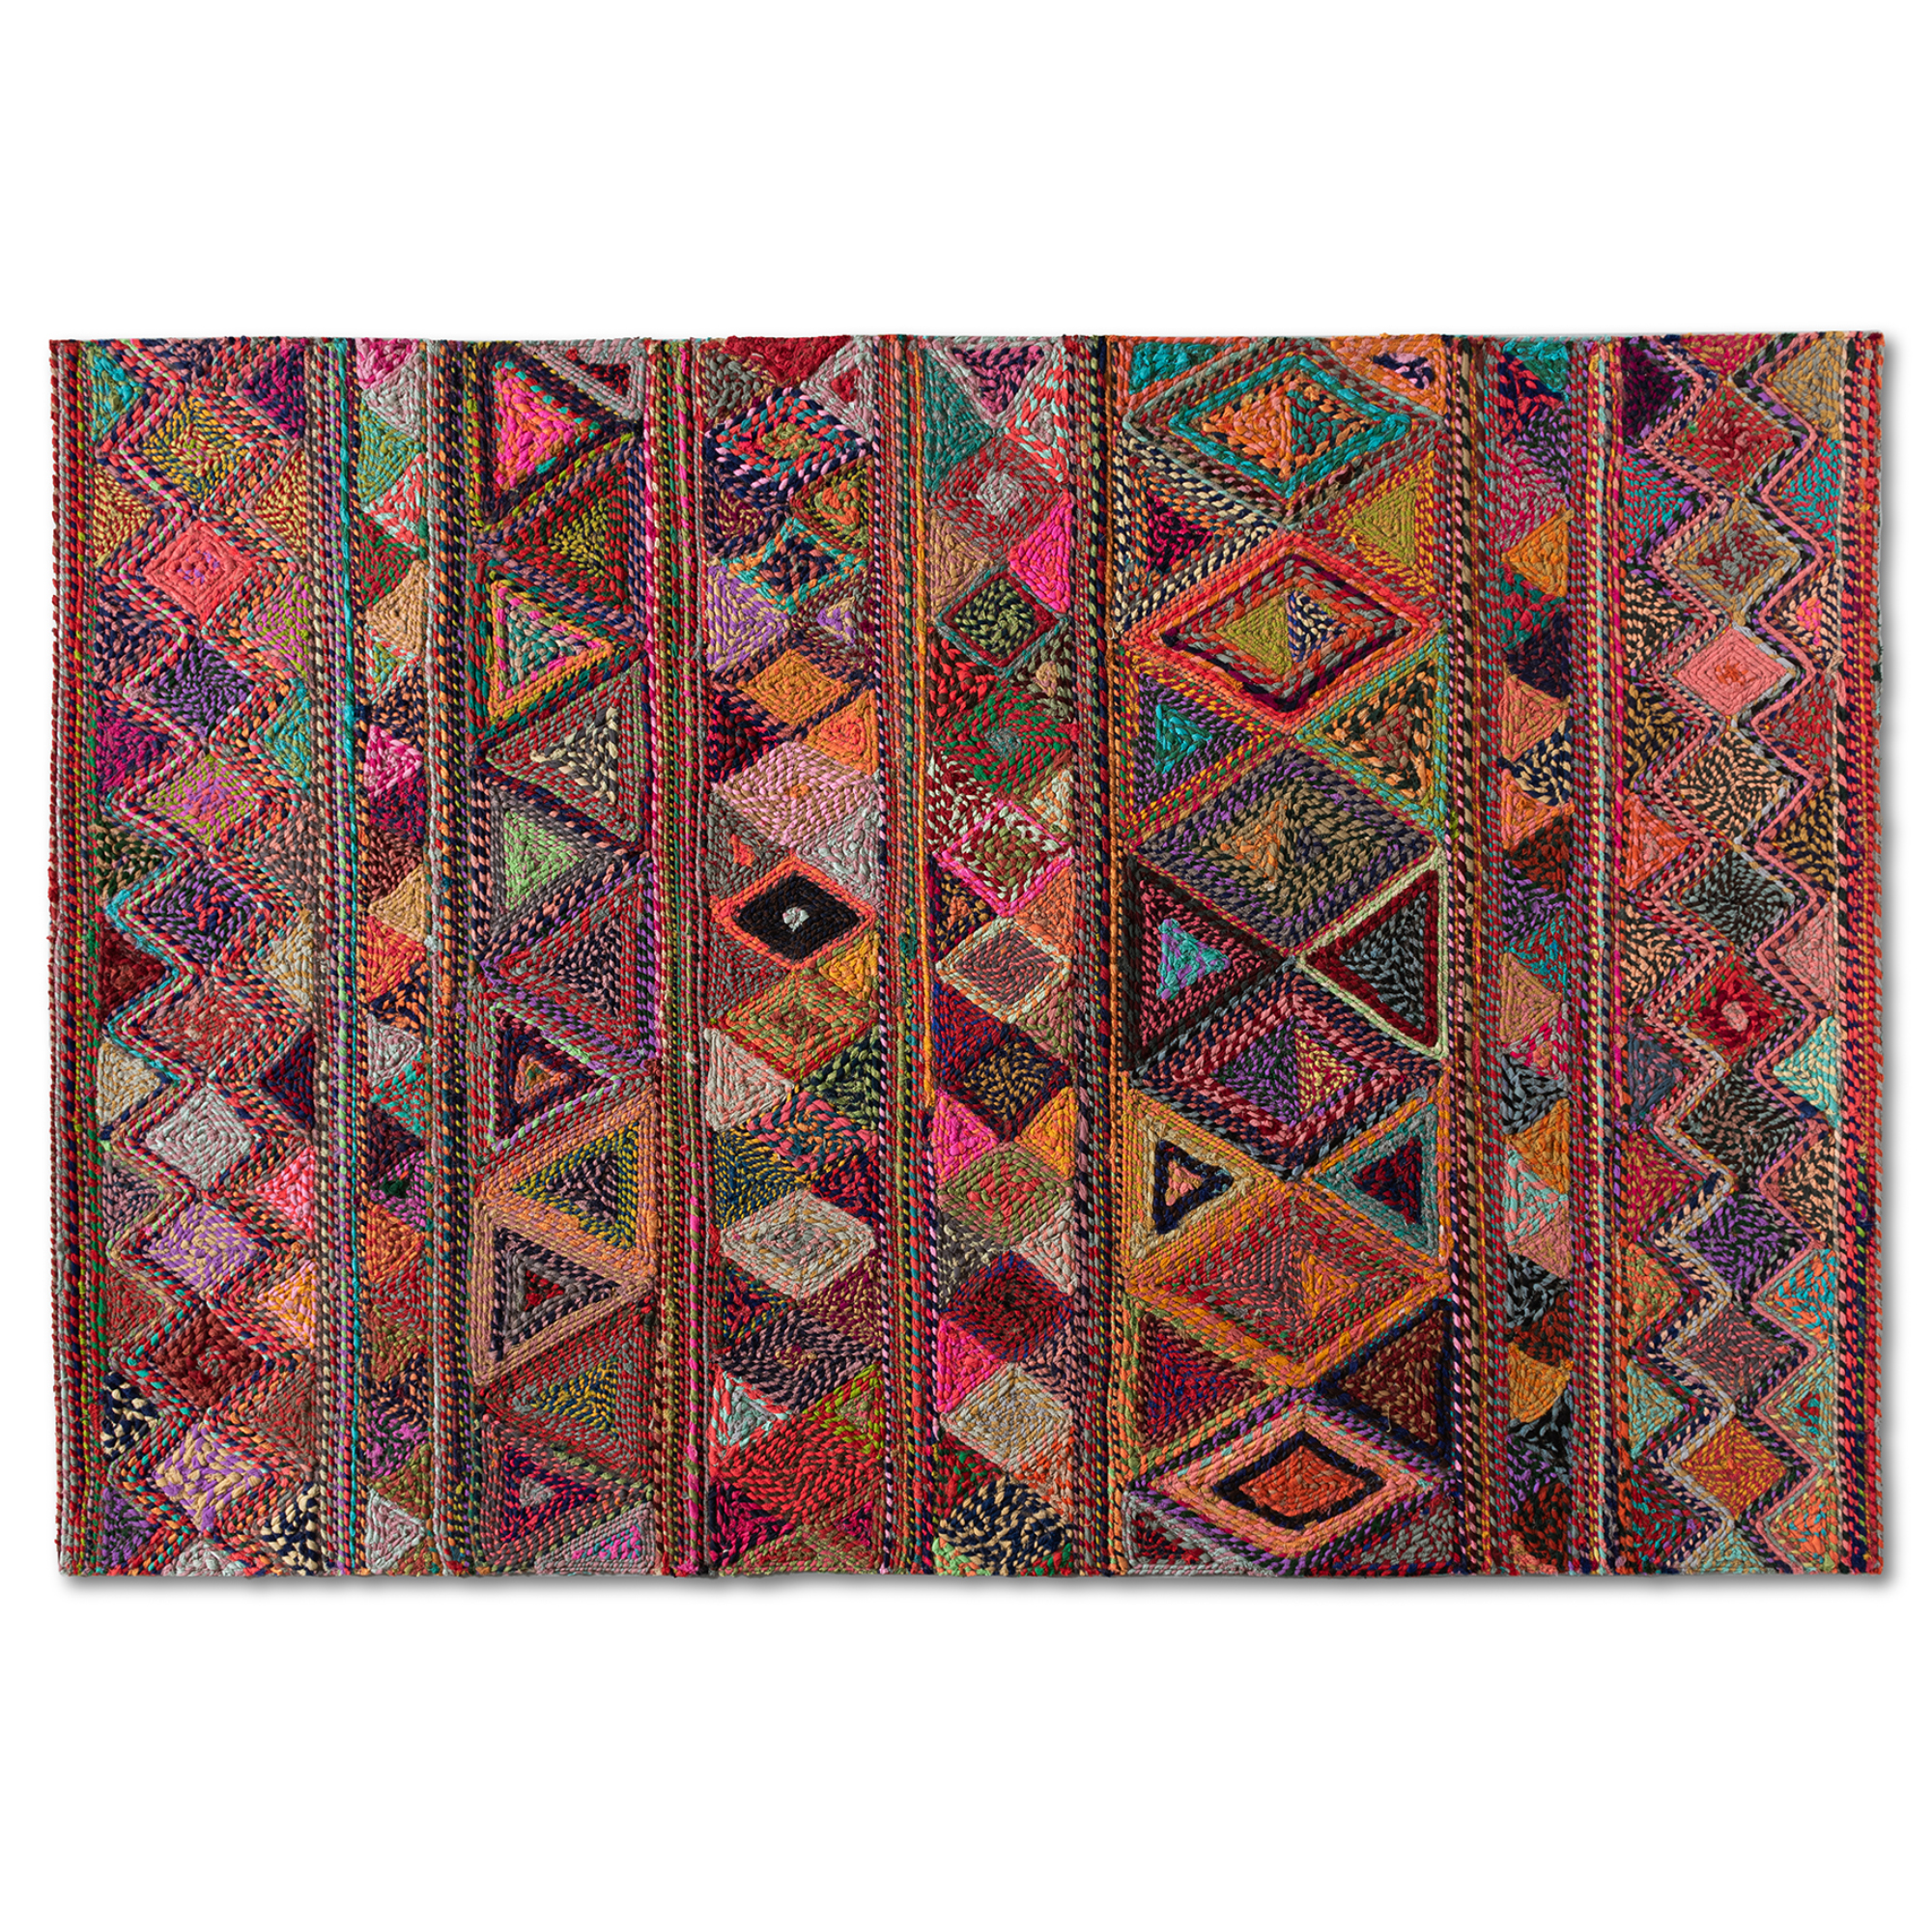 Baxton Studio Bagleys Modern and Contemporary Multi-Colored Handwoven Fabric Area Rug